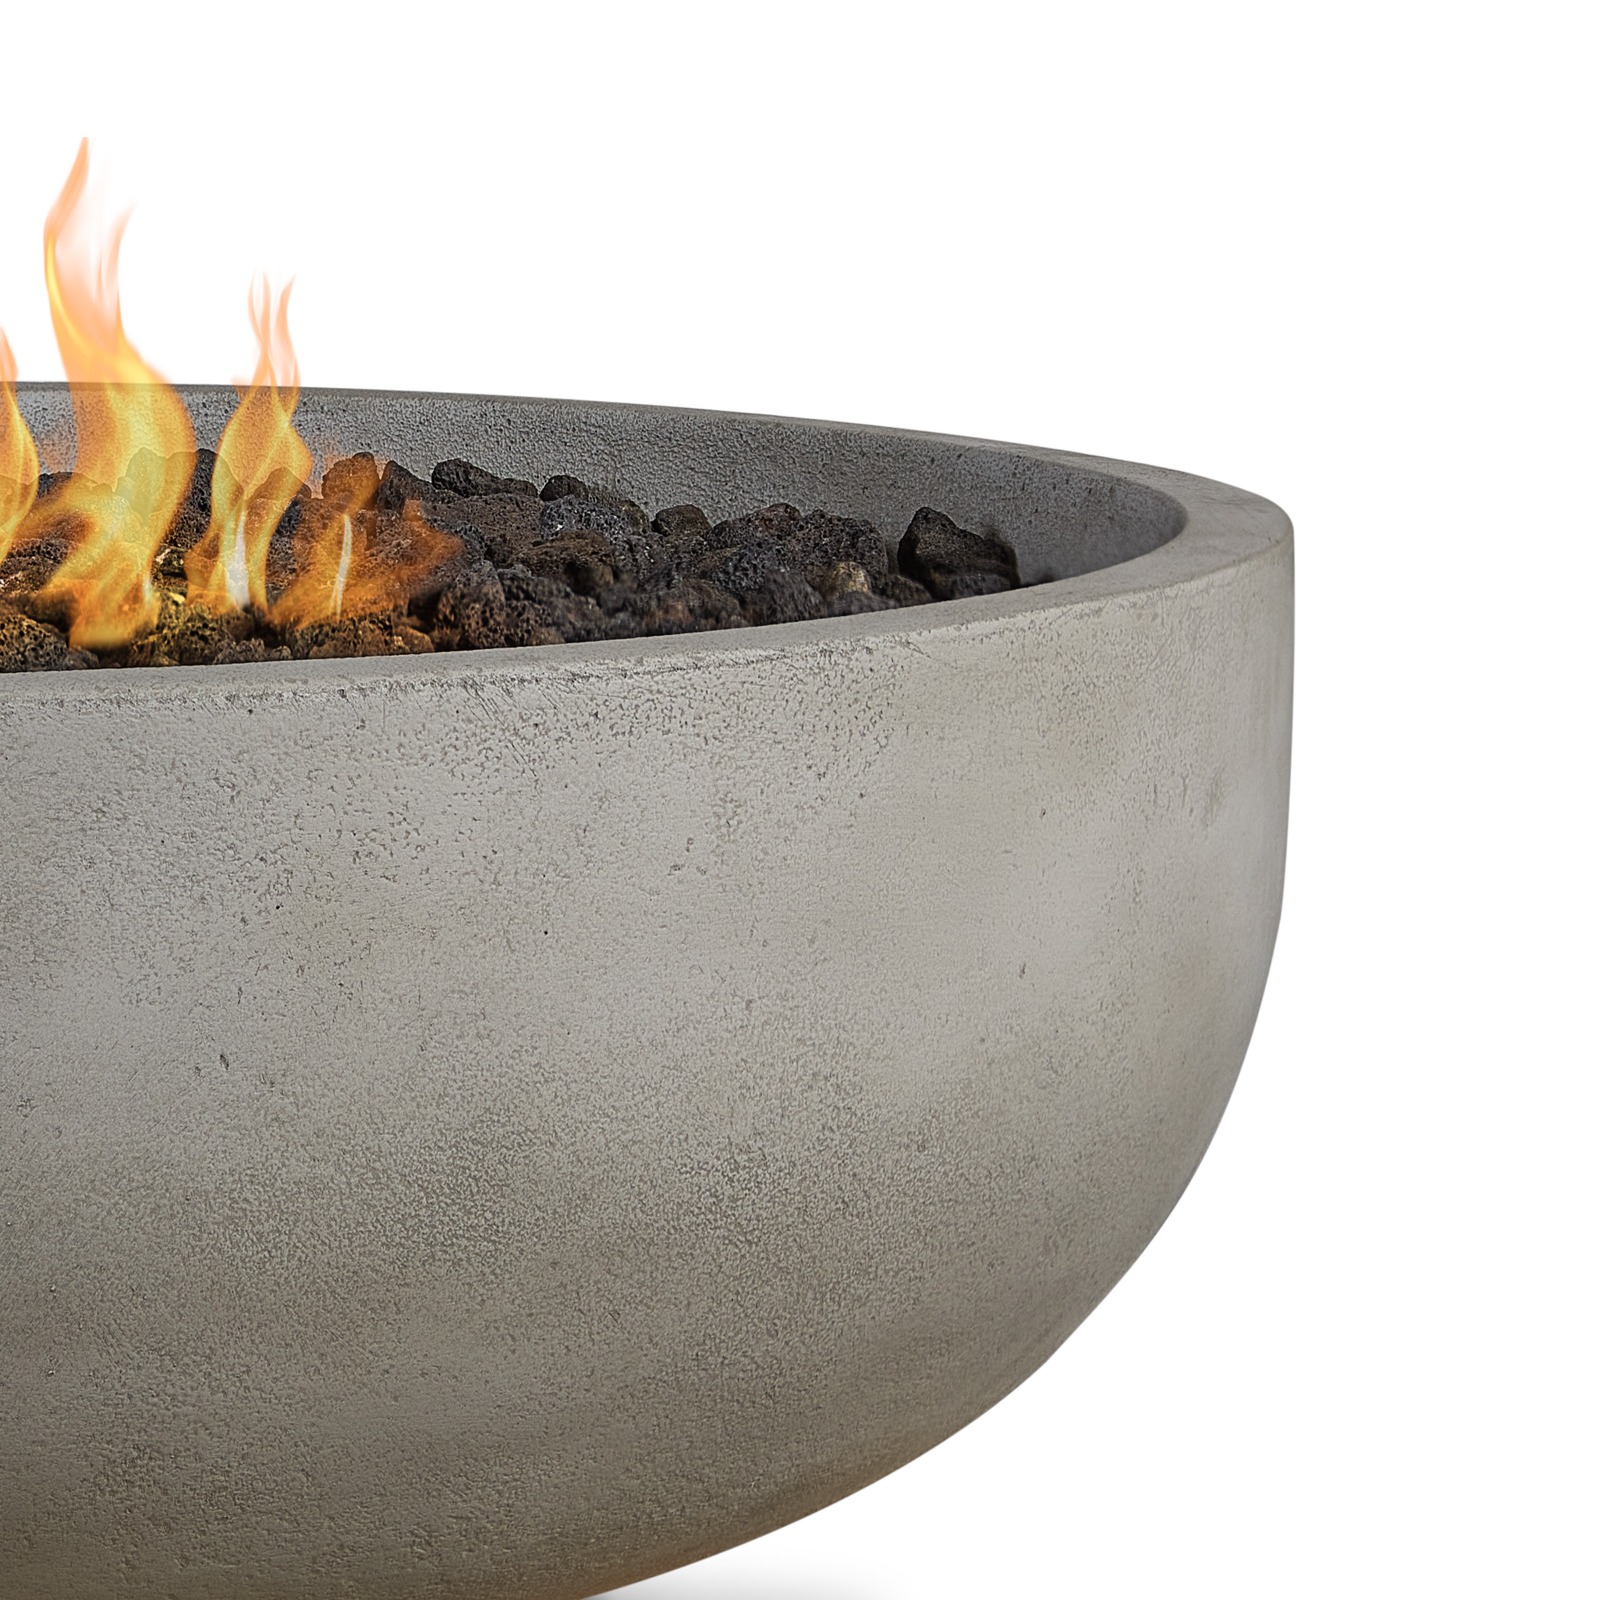 Carson 38" Propane Fire Pit Fire Bowl Outdoor Fireplace Fire Table for Backyard or Patio